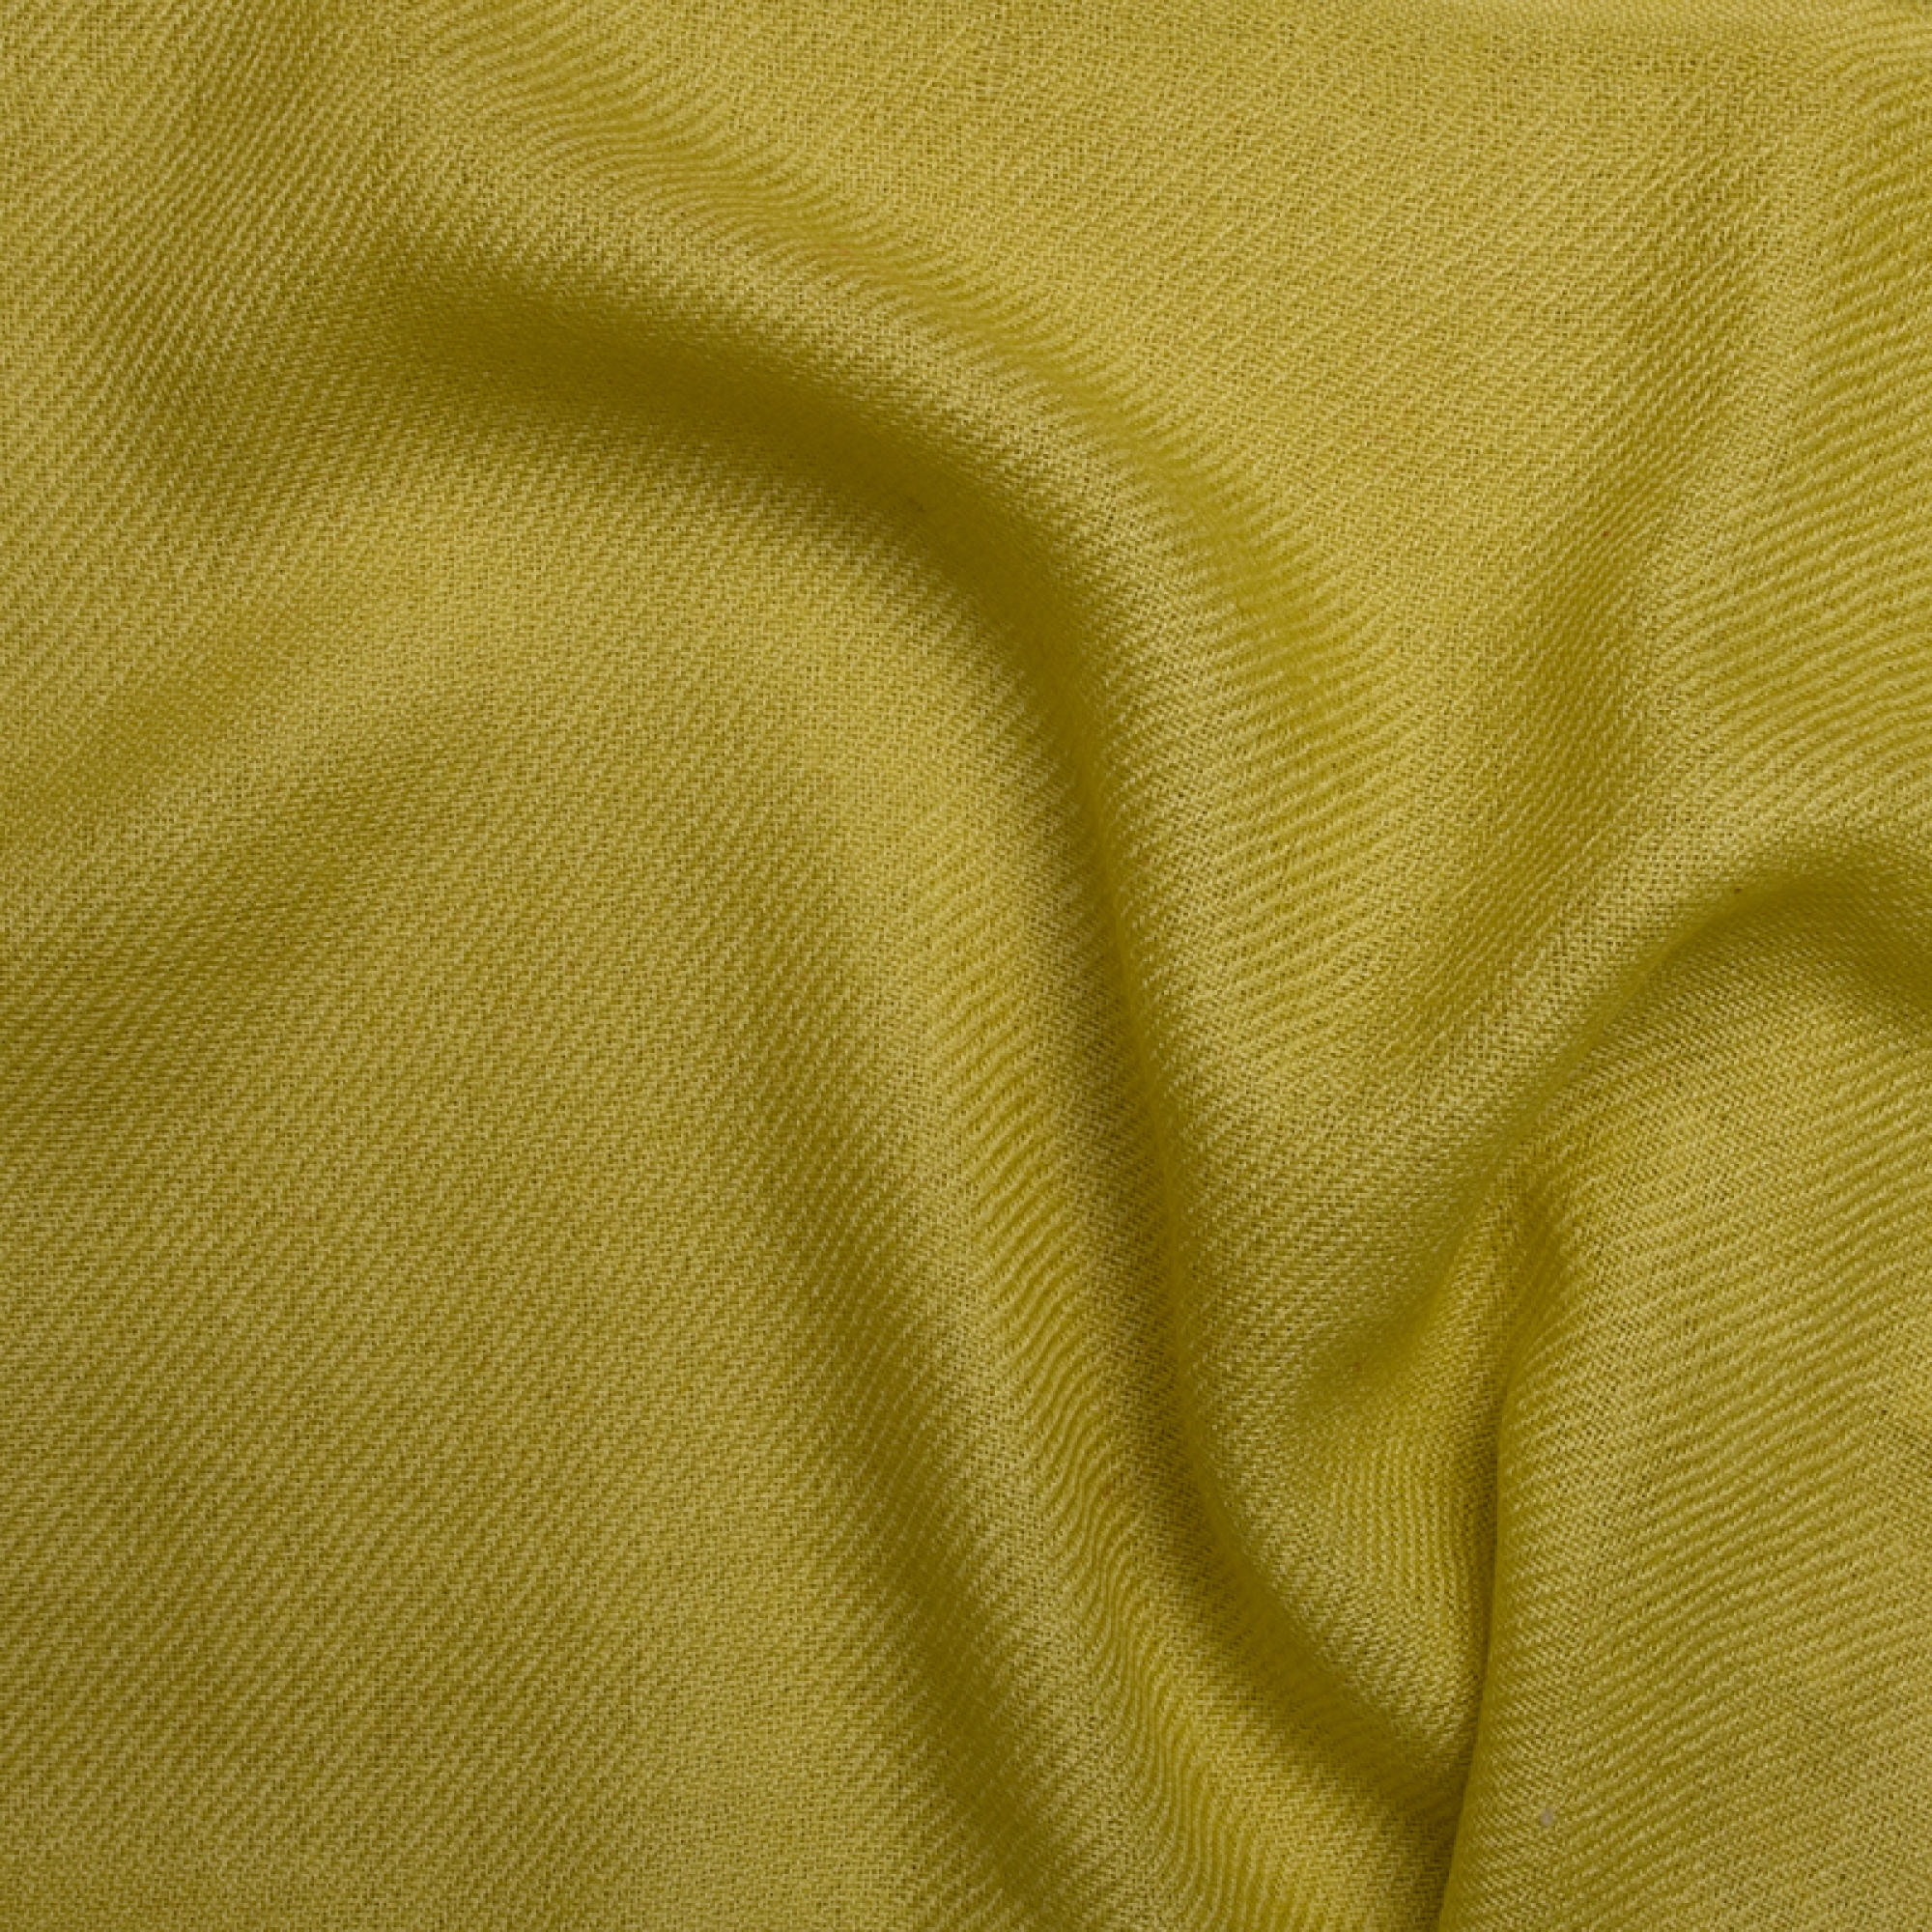 Cashmere accessories blanket frisbi 147 x 203 sunny lime 147 x 203 cm